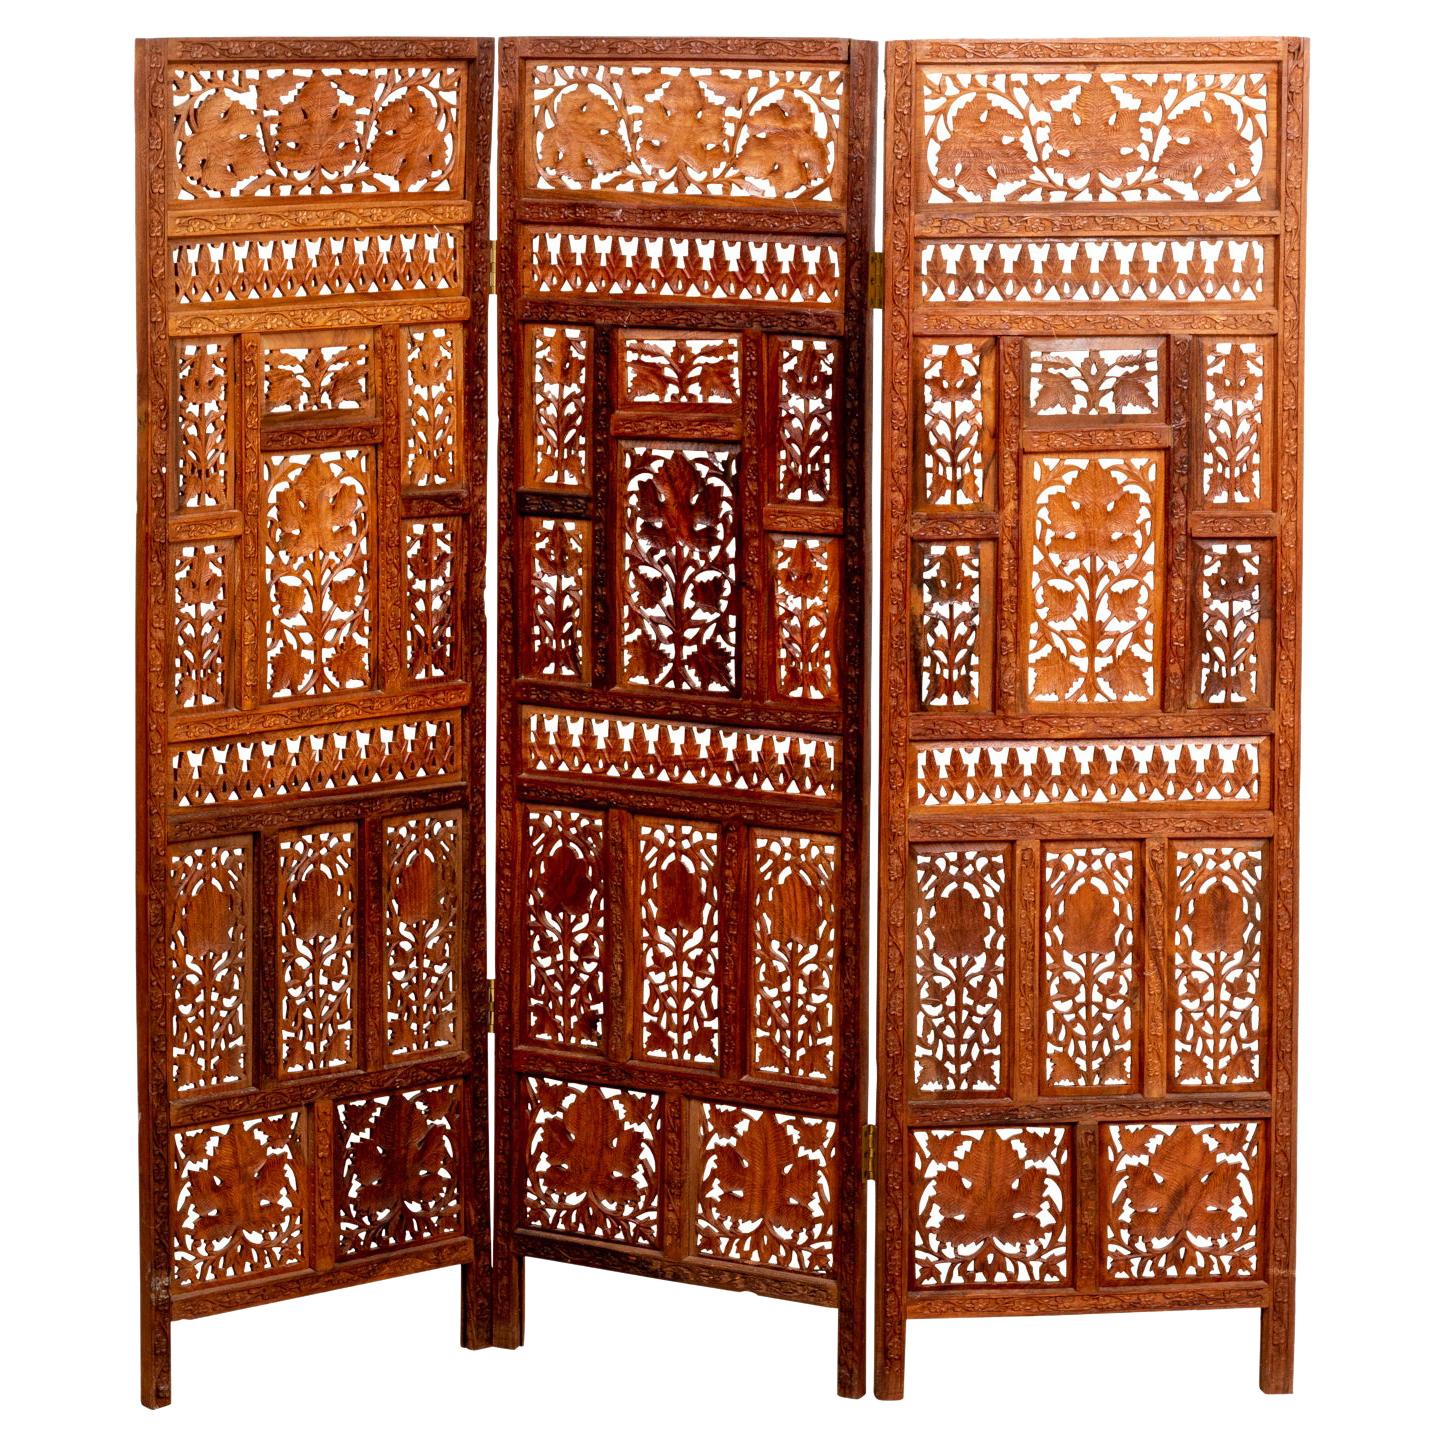 Three Panel Anglo-Indian Screen